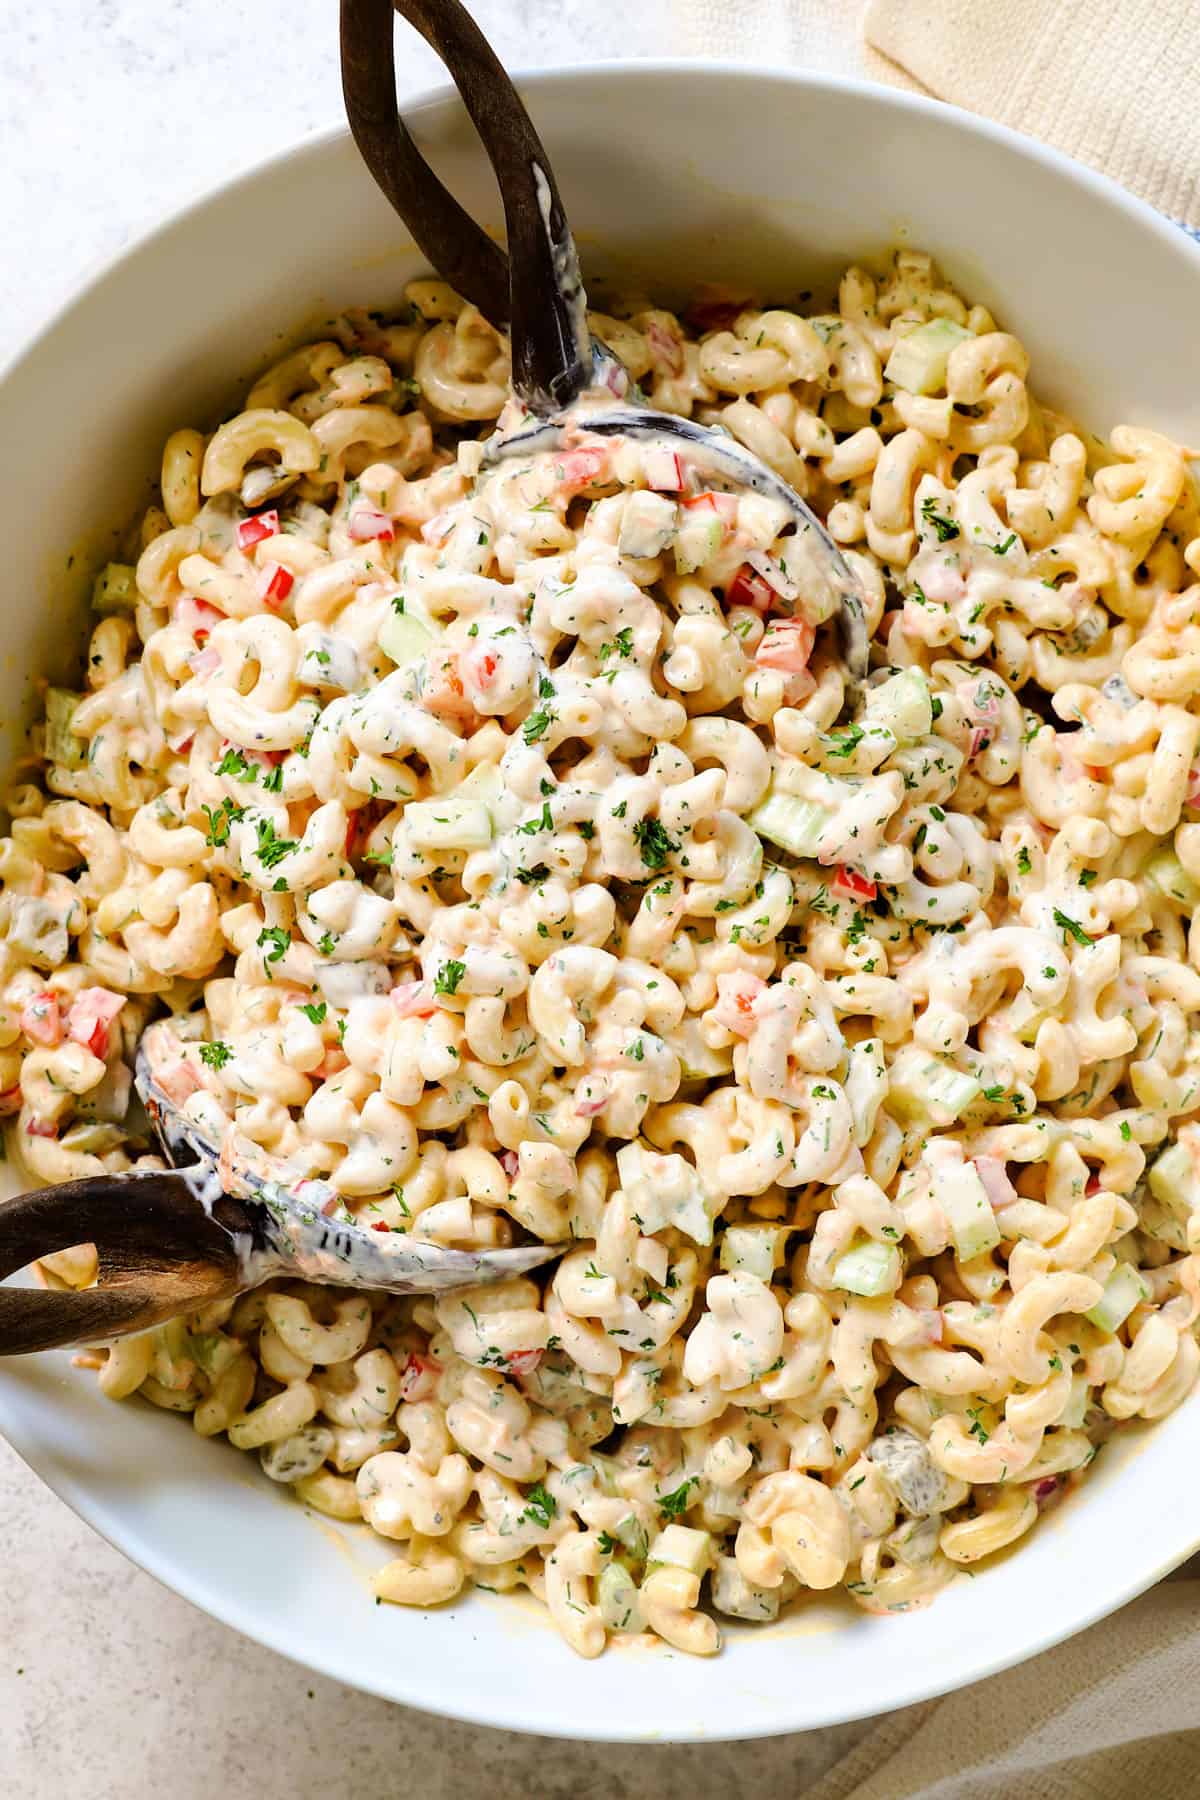 showing how to make macaroni salad recipe by tossing the salad dressing with the salad ingredients until creamy